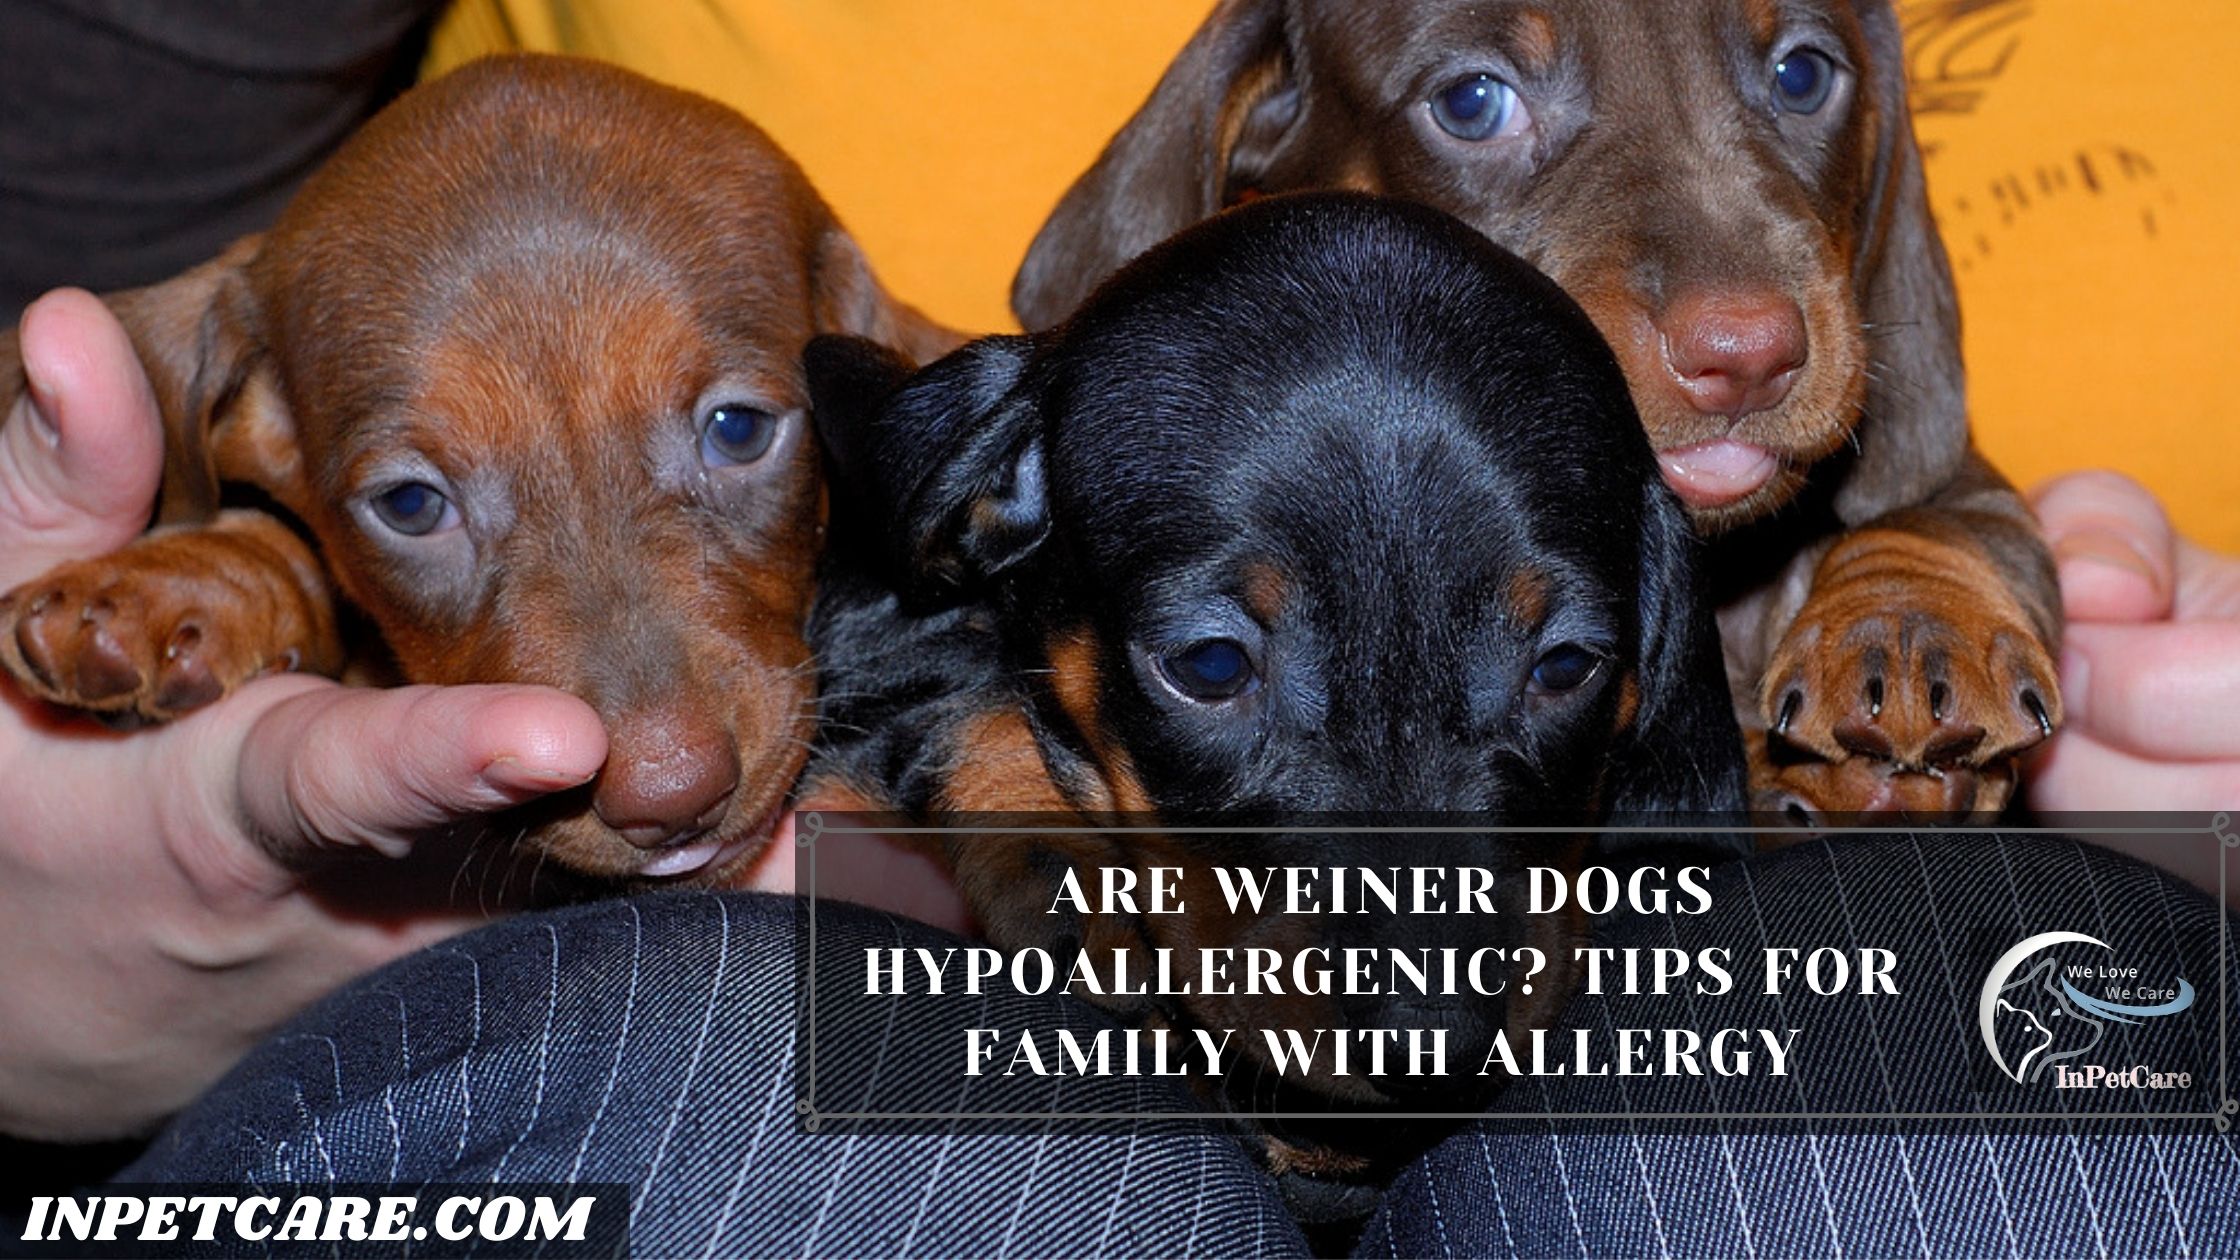 Are Weiner Dogs Hypoallergenic? Tips For Family With Allergy